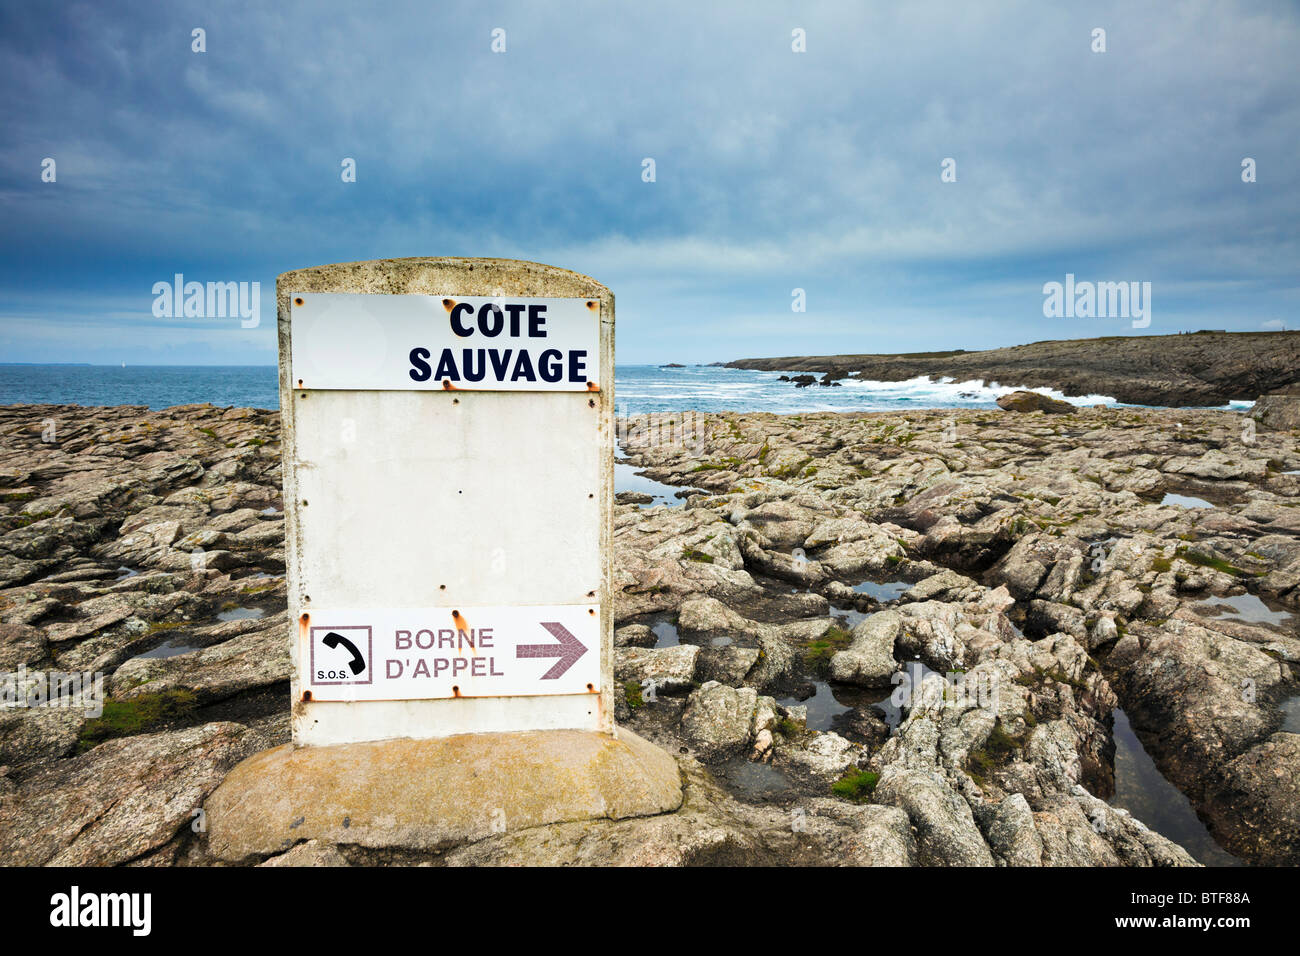 Water safety information on the Cote Sauvage, Morbihan, Brittany, France, Europe Stock Photo